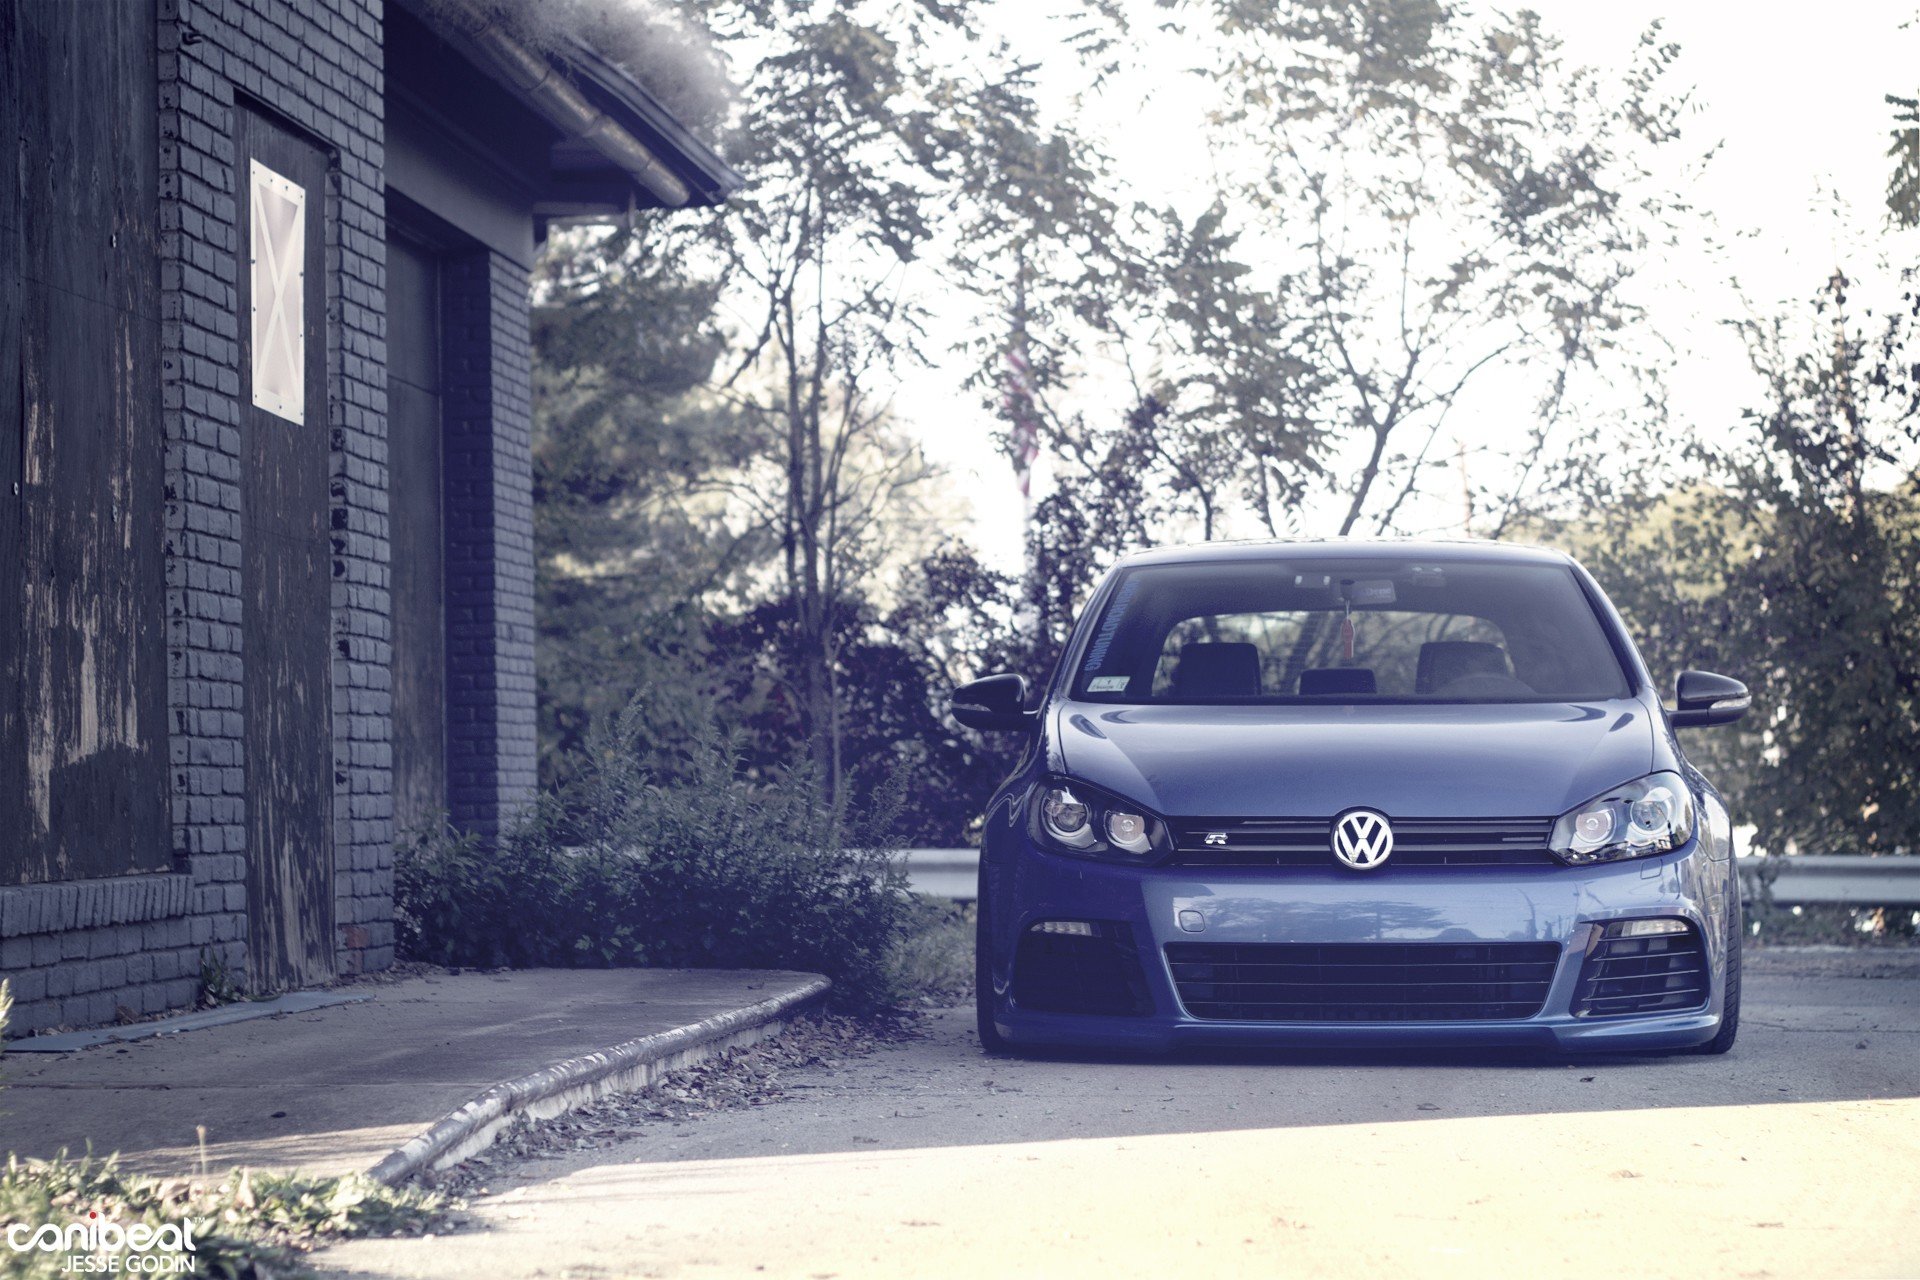 Awesome Volkswagen Golf free wallpaper ID:144850 for hd 1920x1280 computer